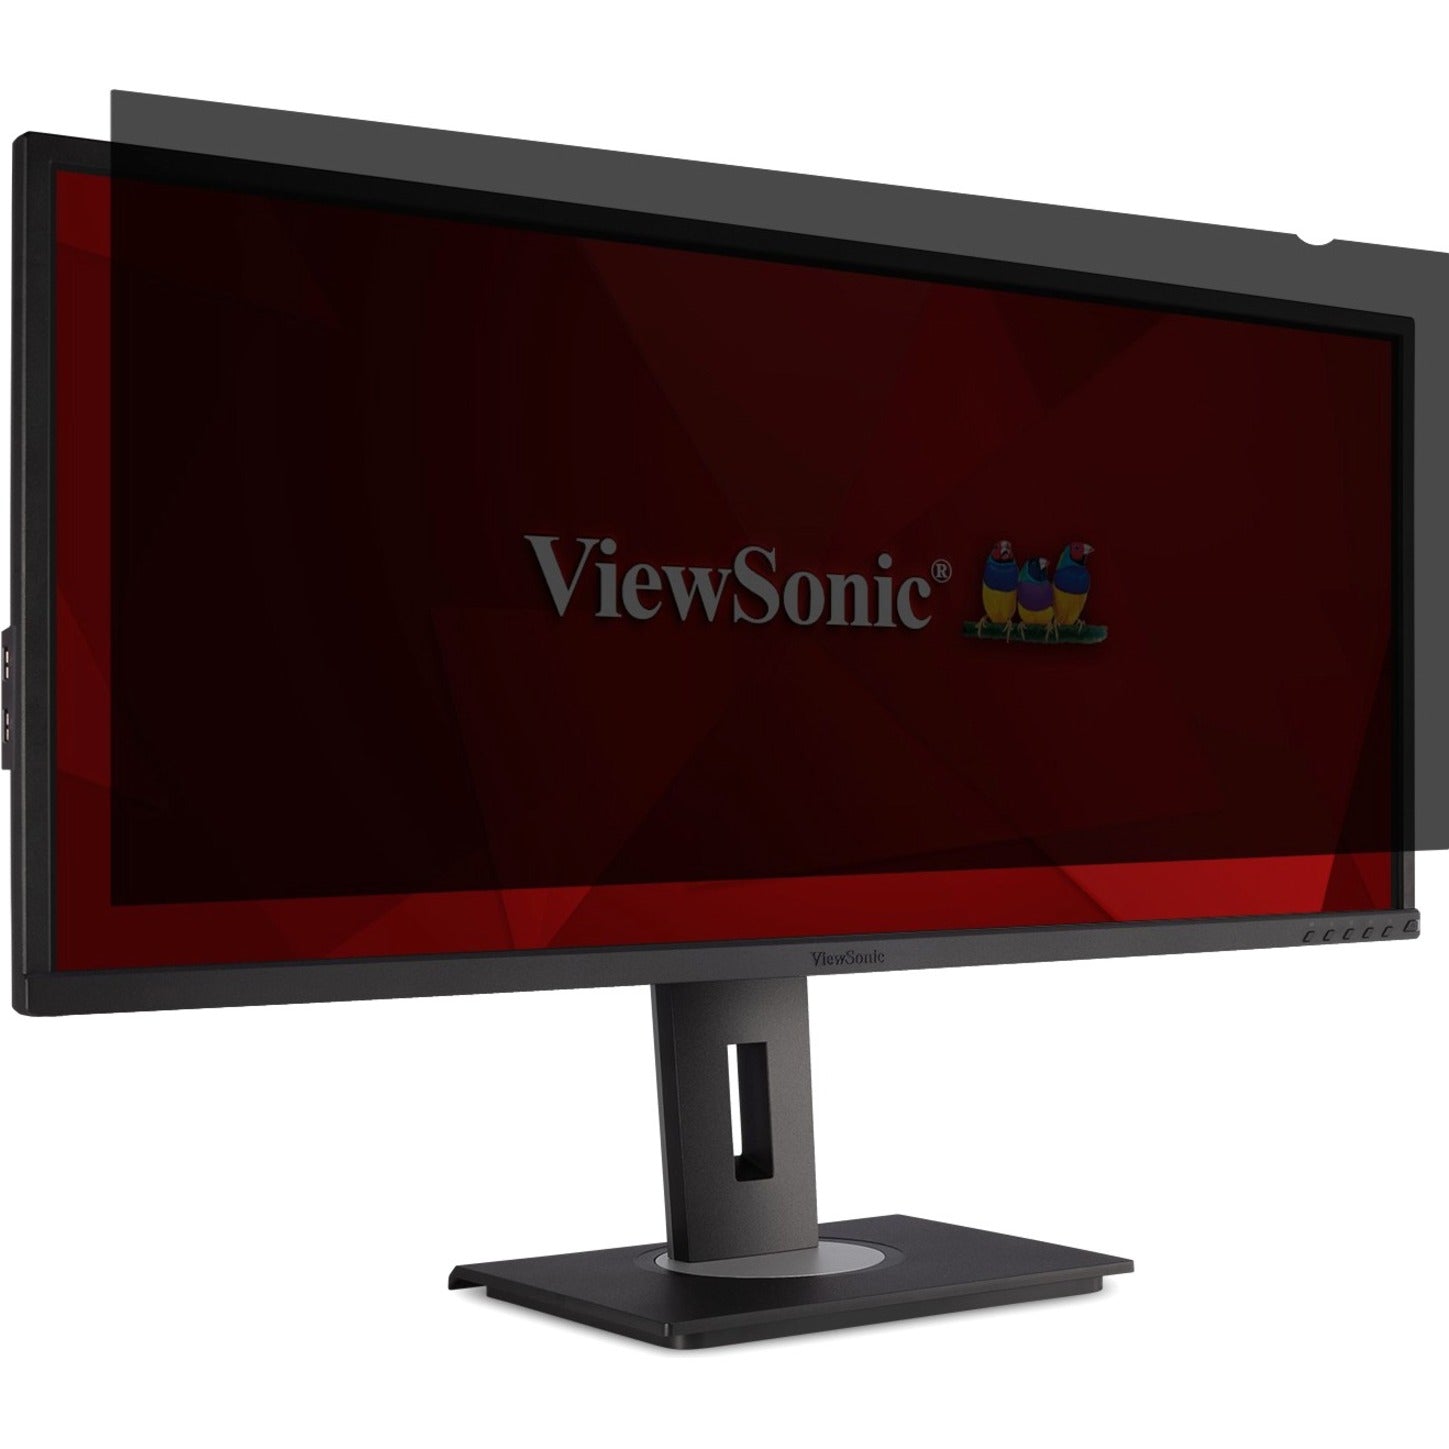 ViewSonic VP-PF-3400 Privacy Filter Screen Protector, Clear, Black - Protect Your Monitor with Privacy and Anti-Glare Features